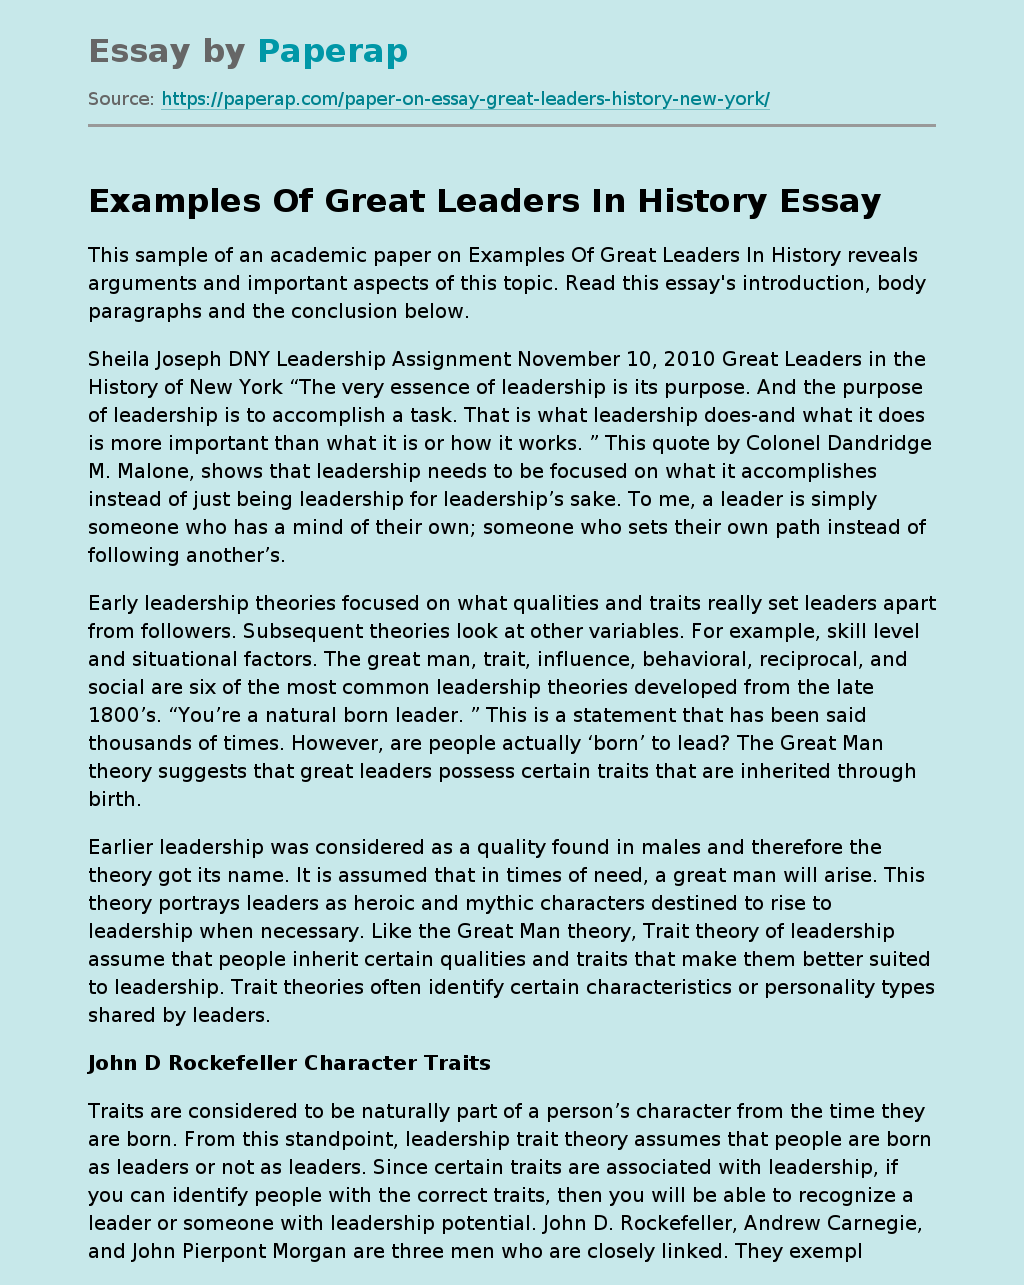 Examples Of Great Leaders In History